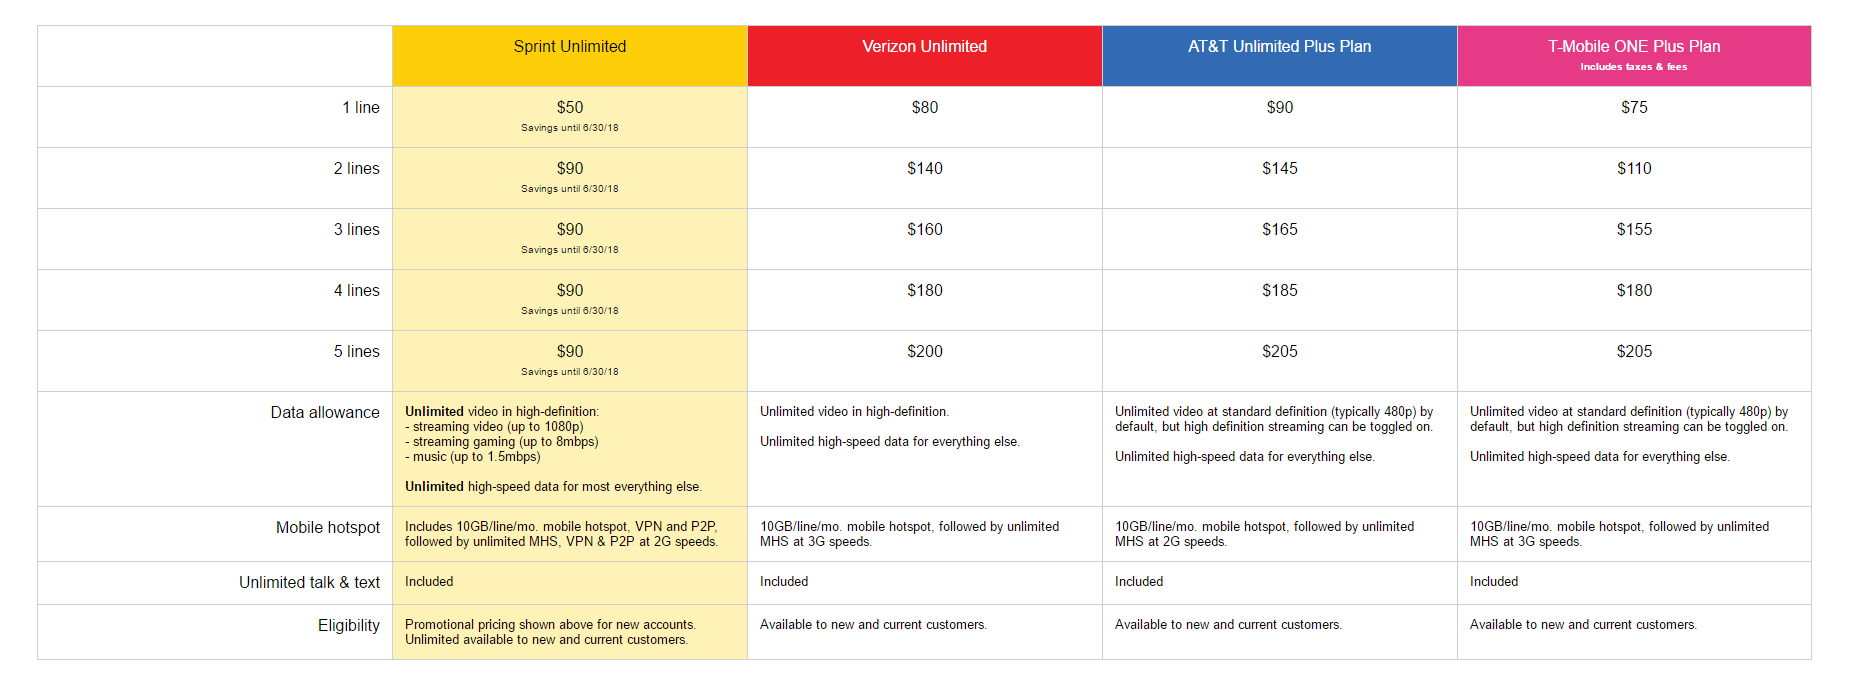 Unlimited Data Plans Comparision: Verizon, AT&T, T-Mobile And Sprint